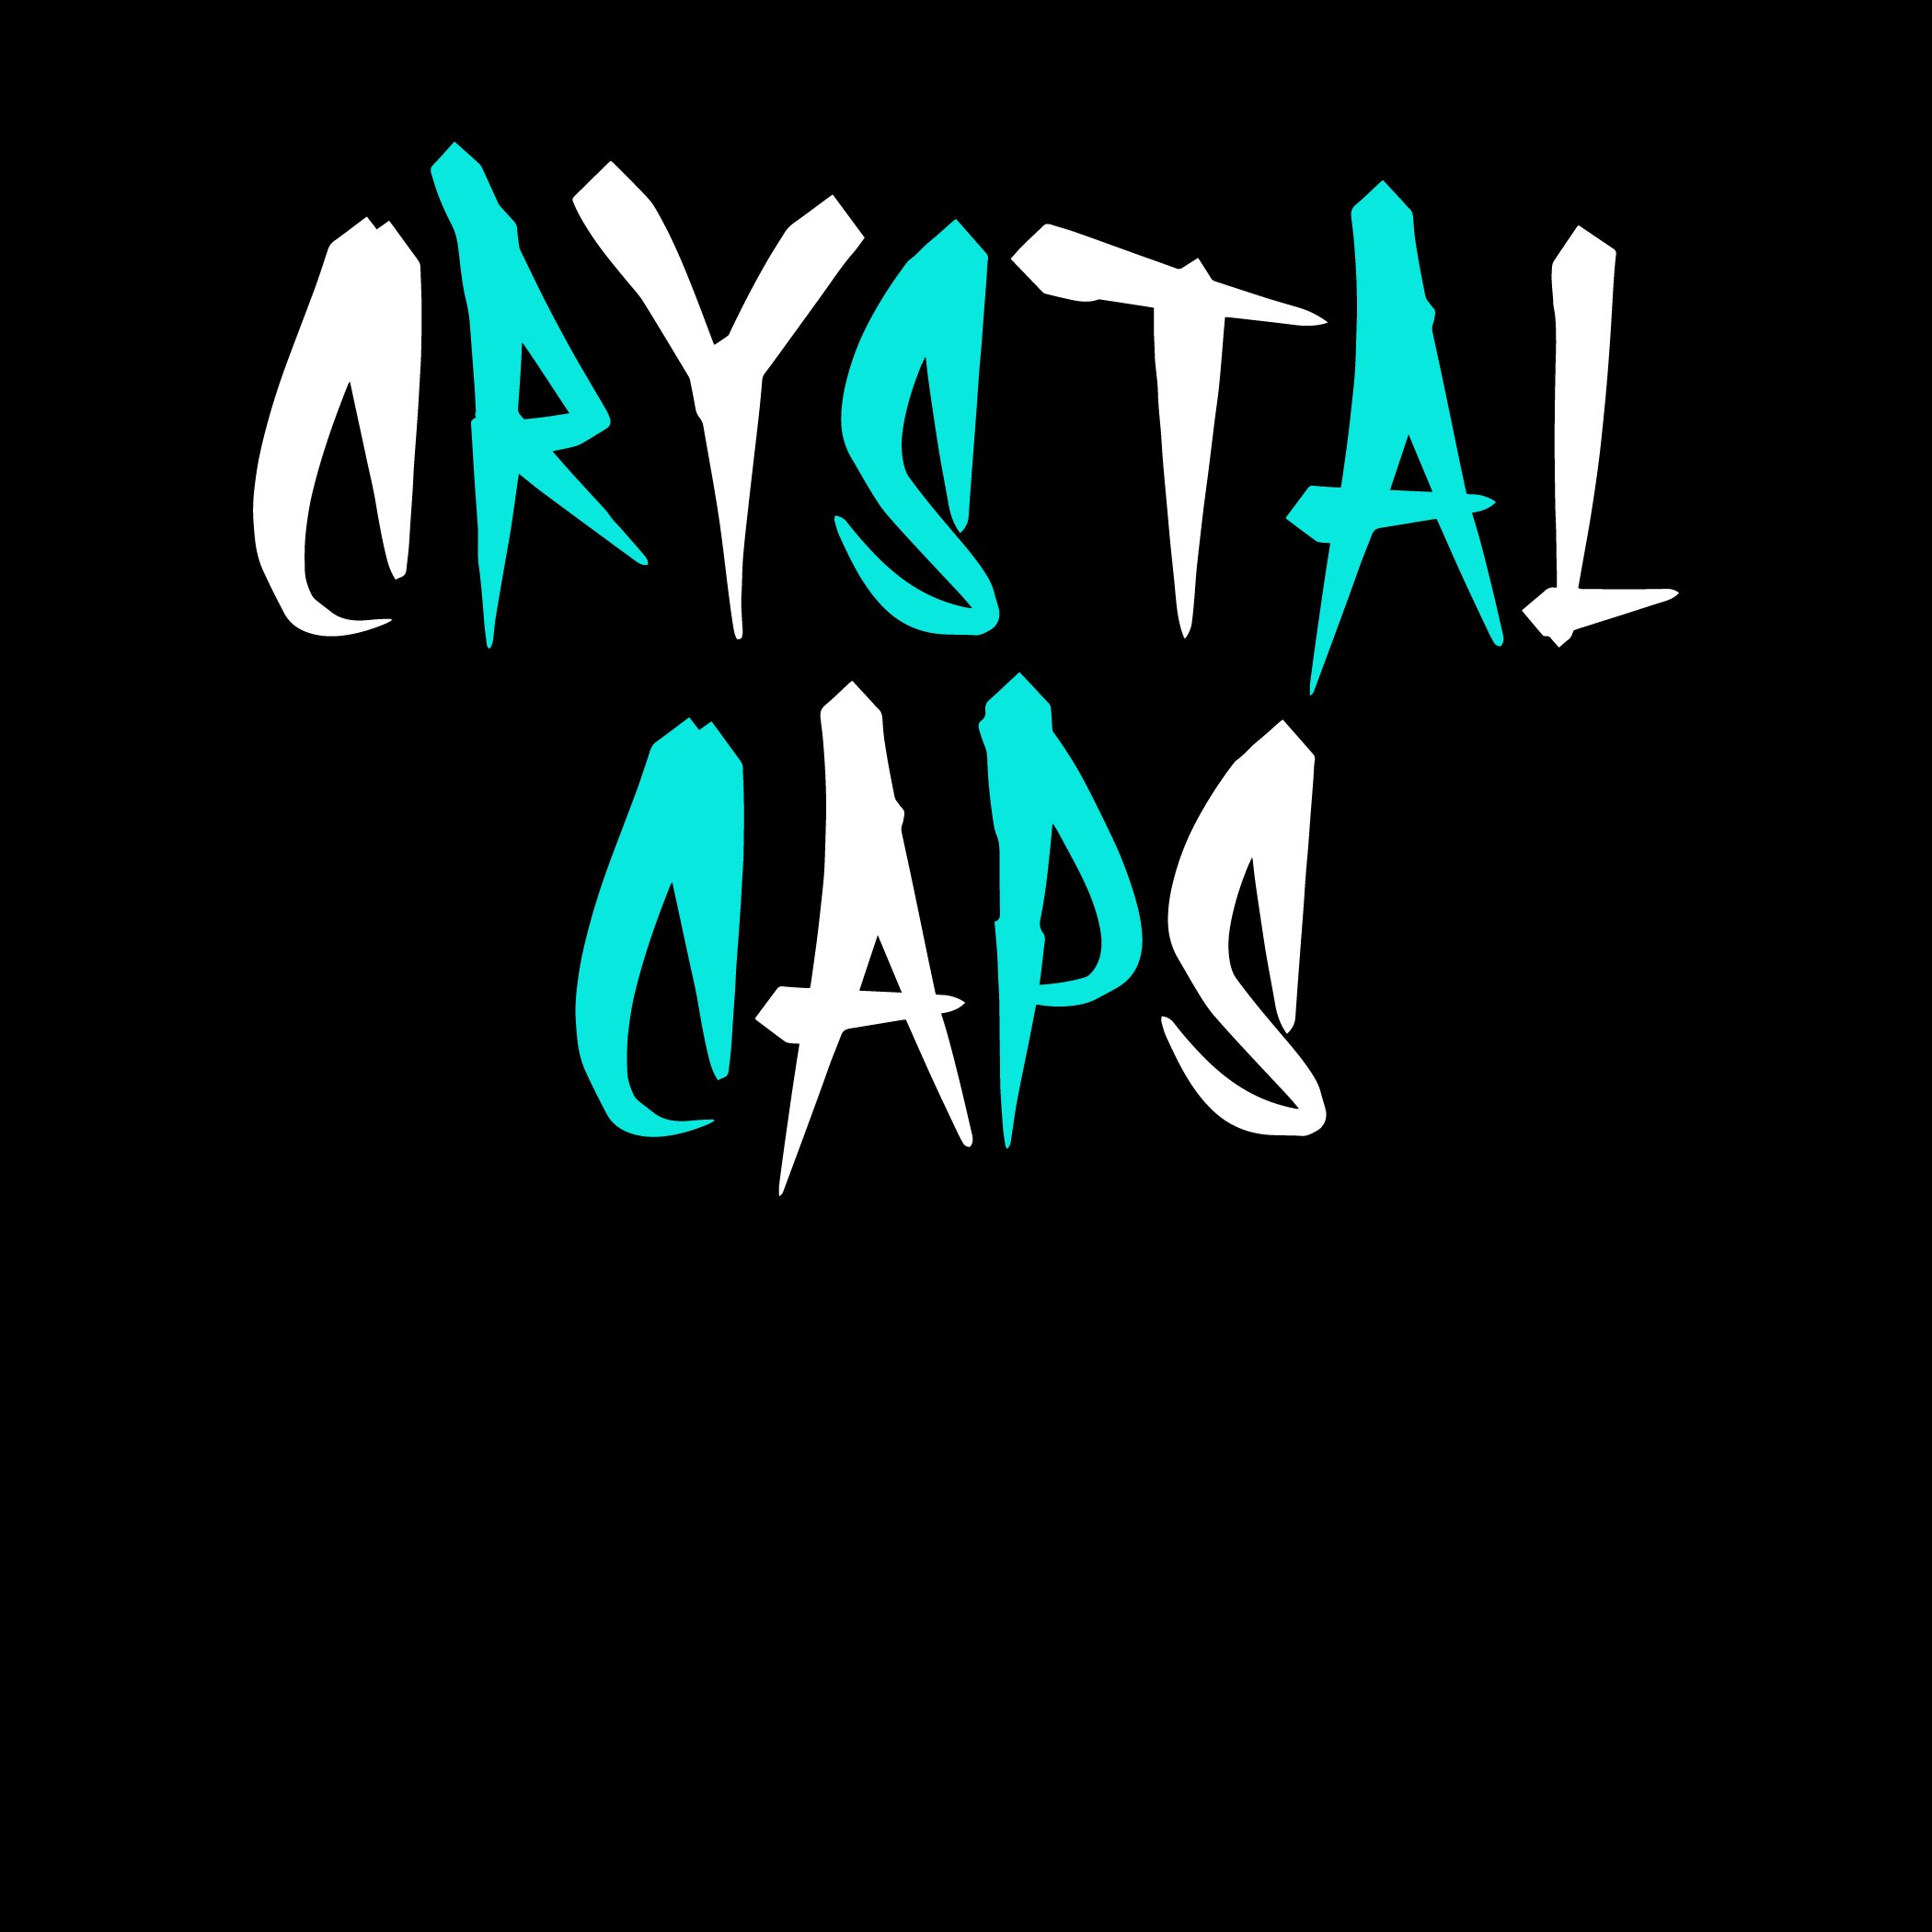 CRYSTAL CAPS cover image.